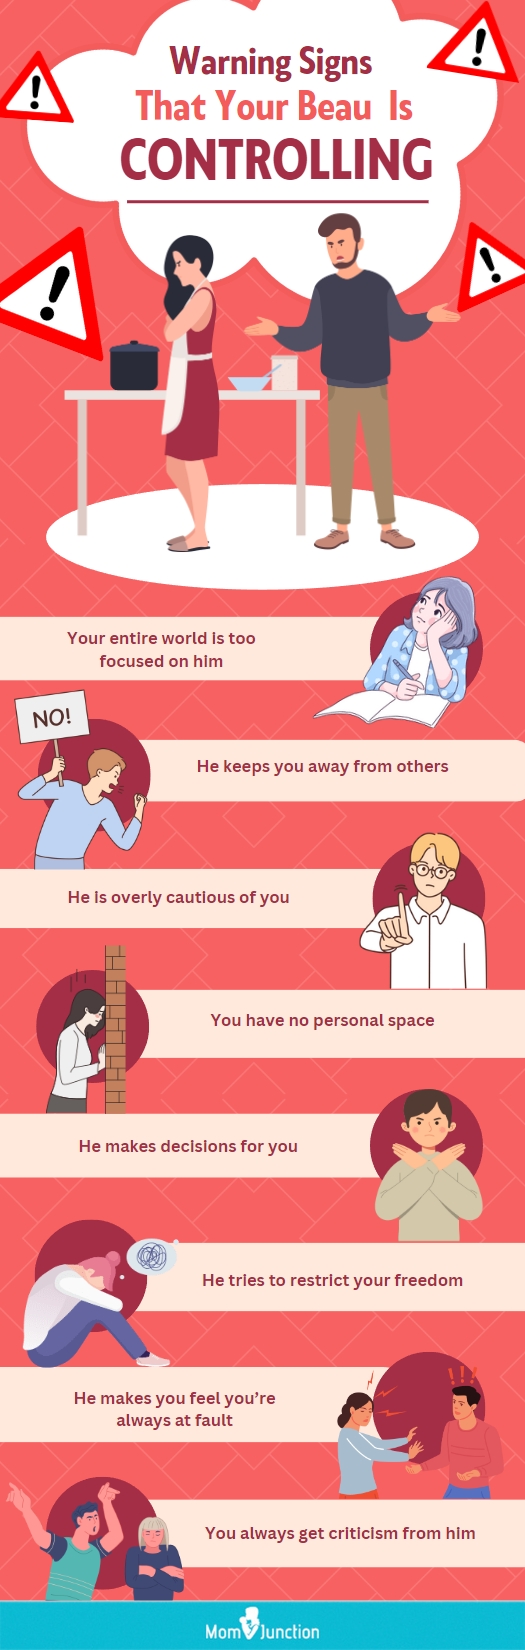 warning signs that your beau is controlling (infographic)